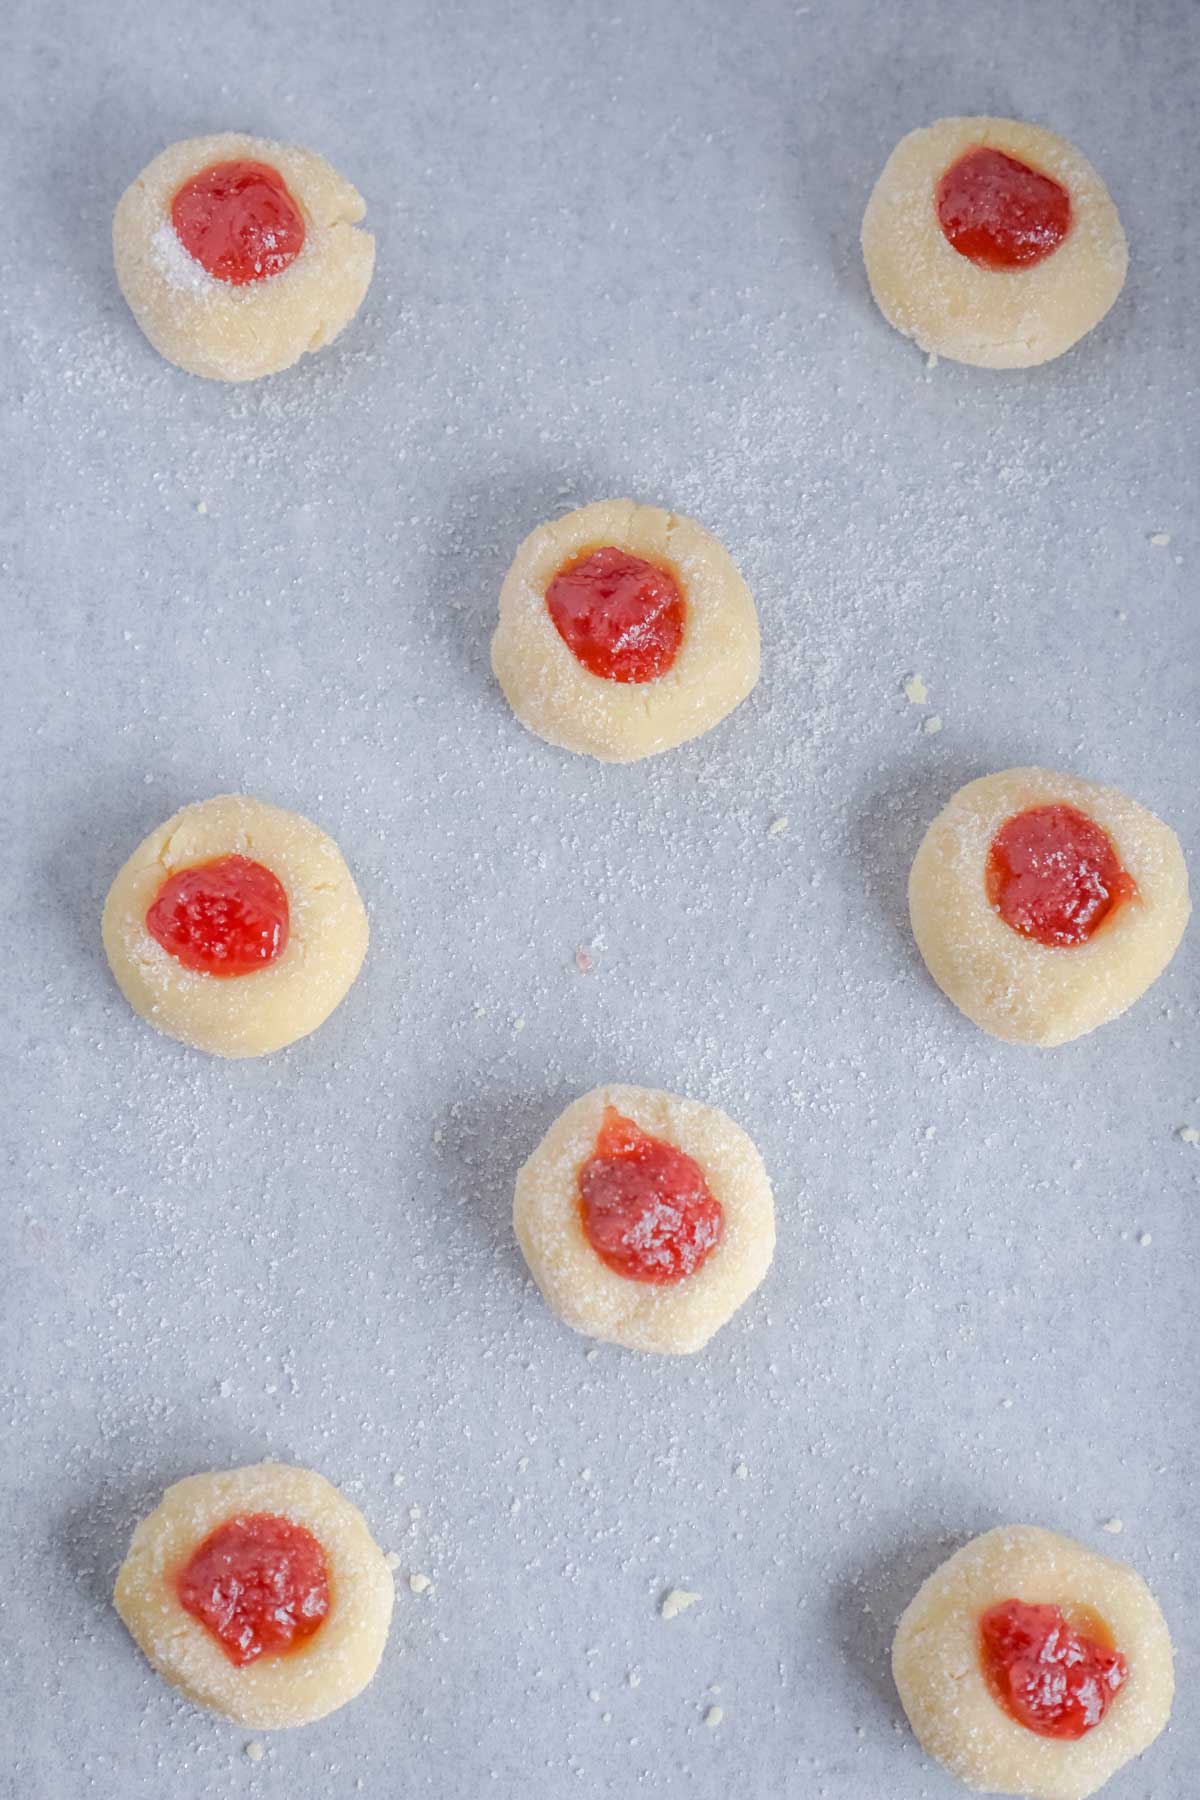 unbaked thumbprint cookies on a baking sheet